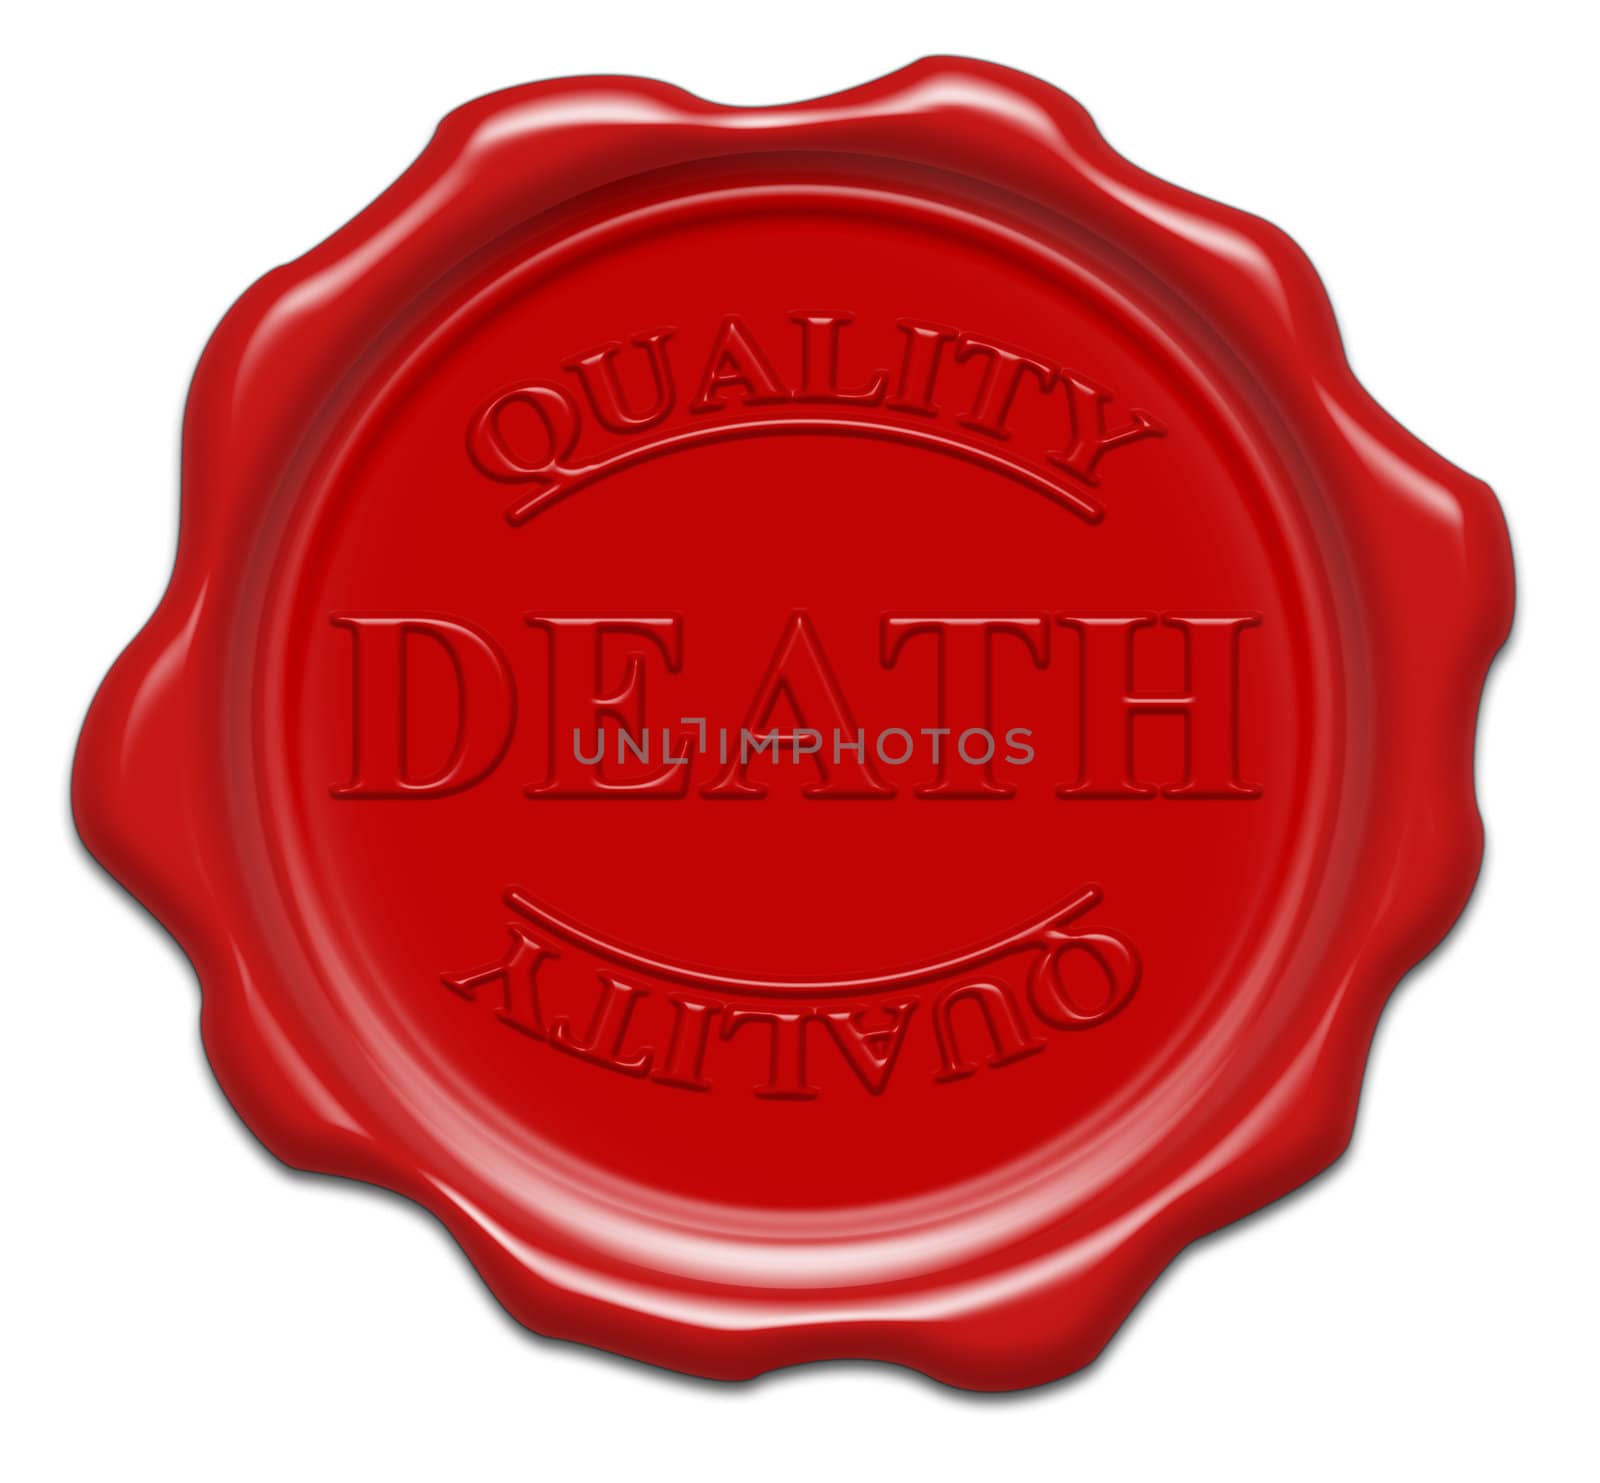 quality death - illustration red wax seal isolated on white background with word : death